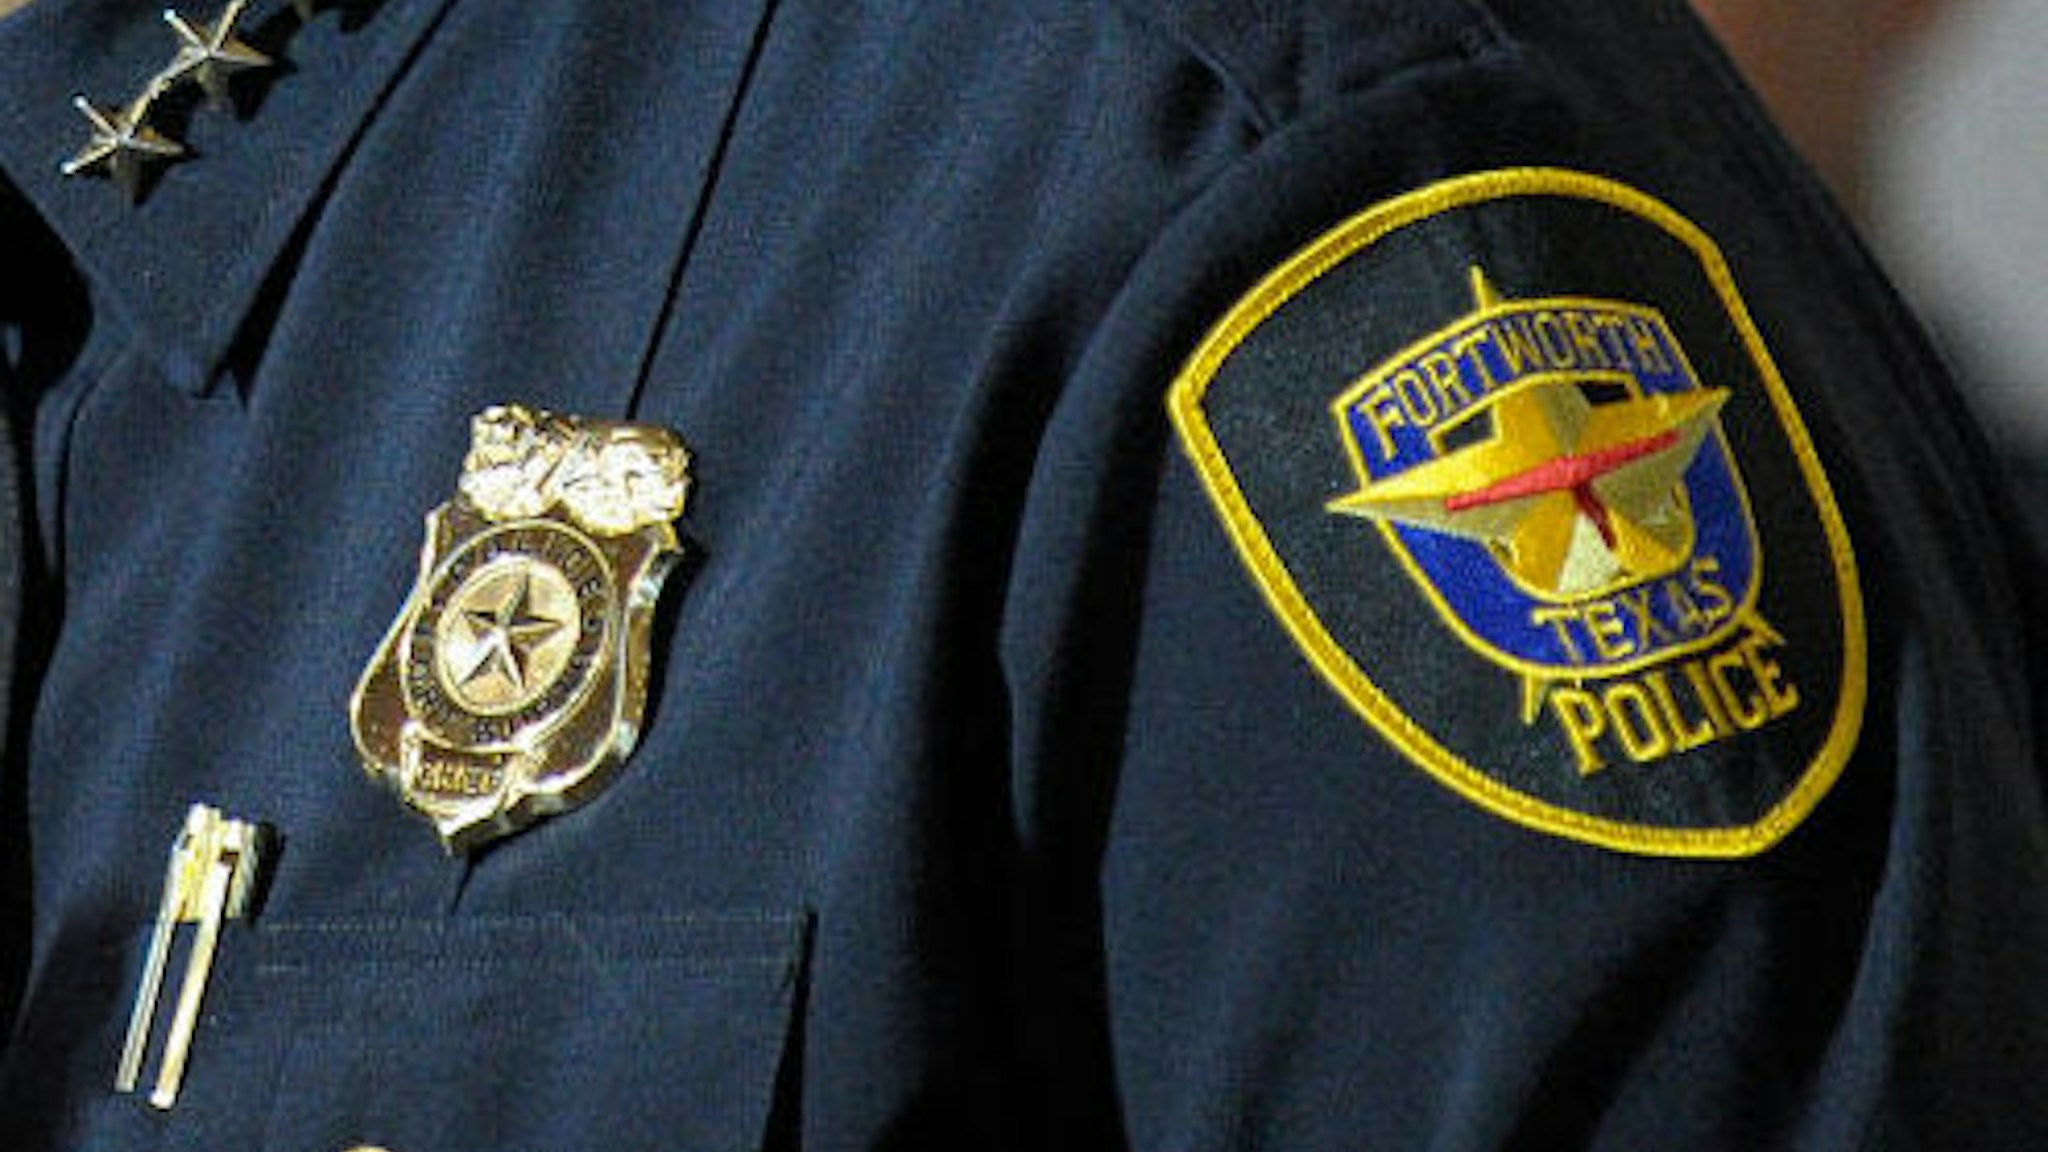 The badge of a Fort Worth Police officer